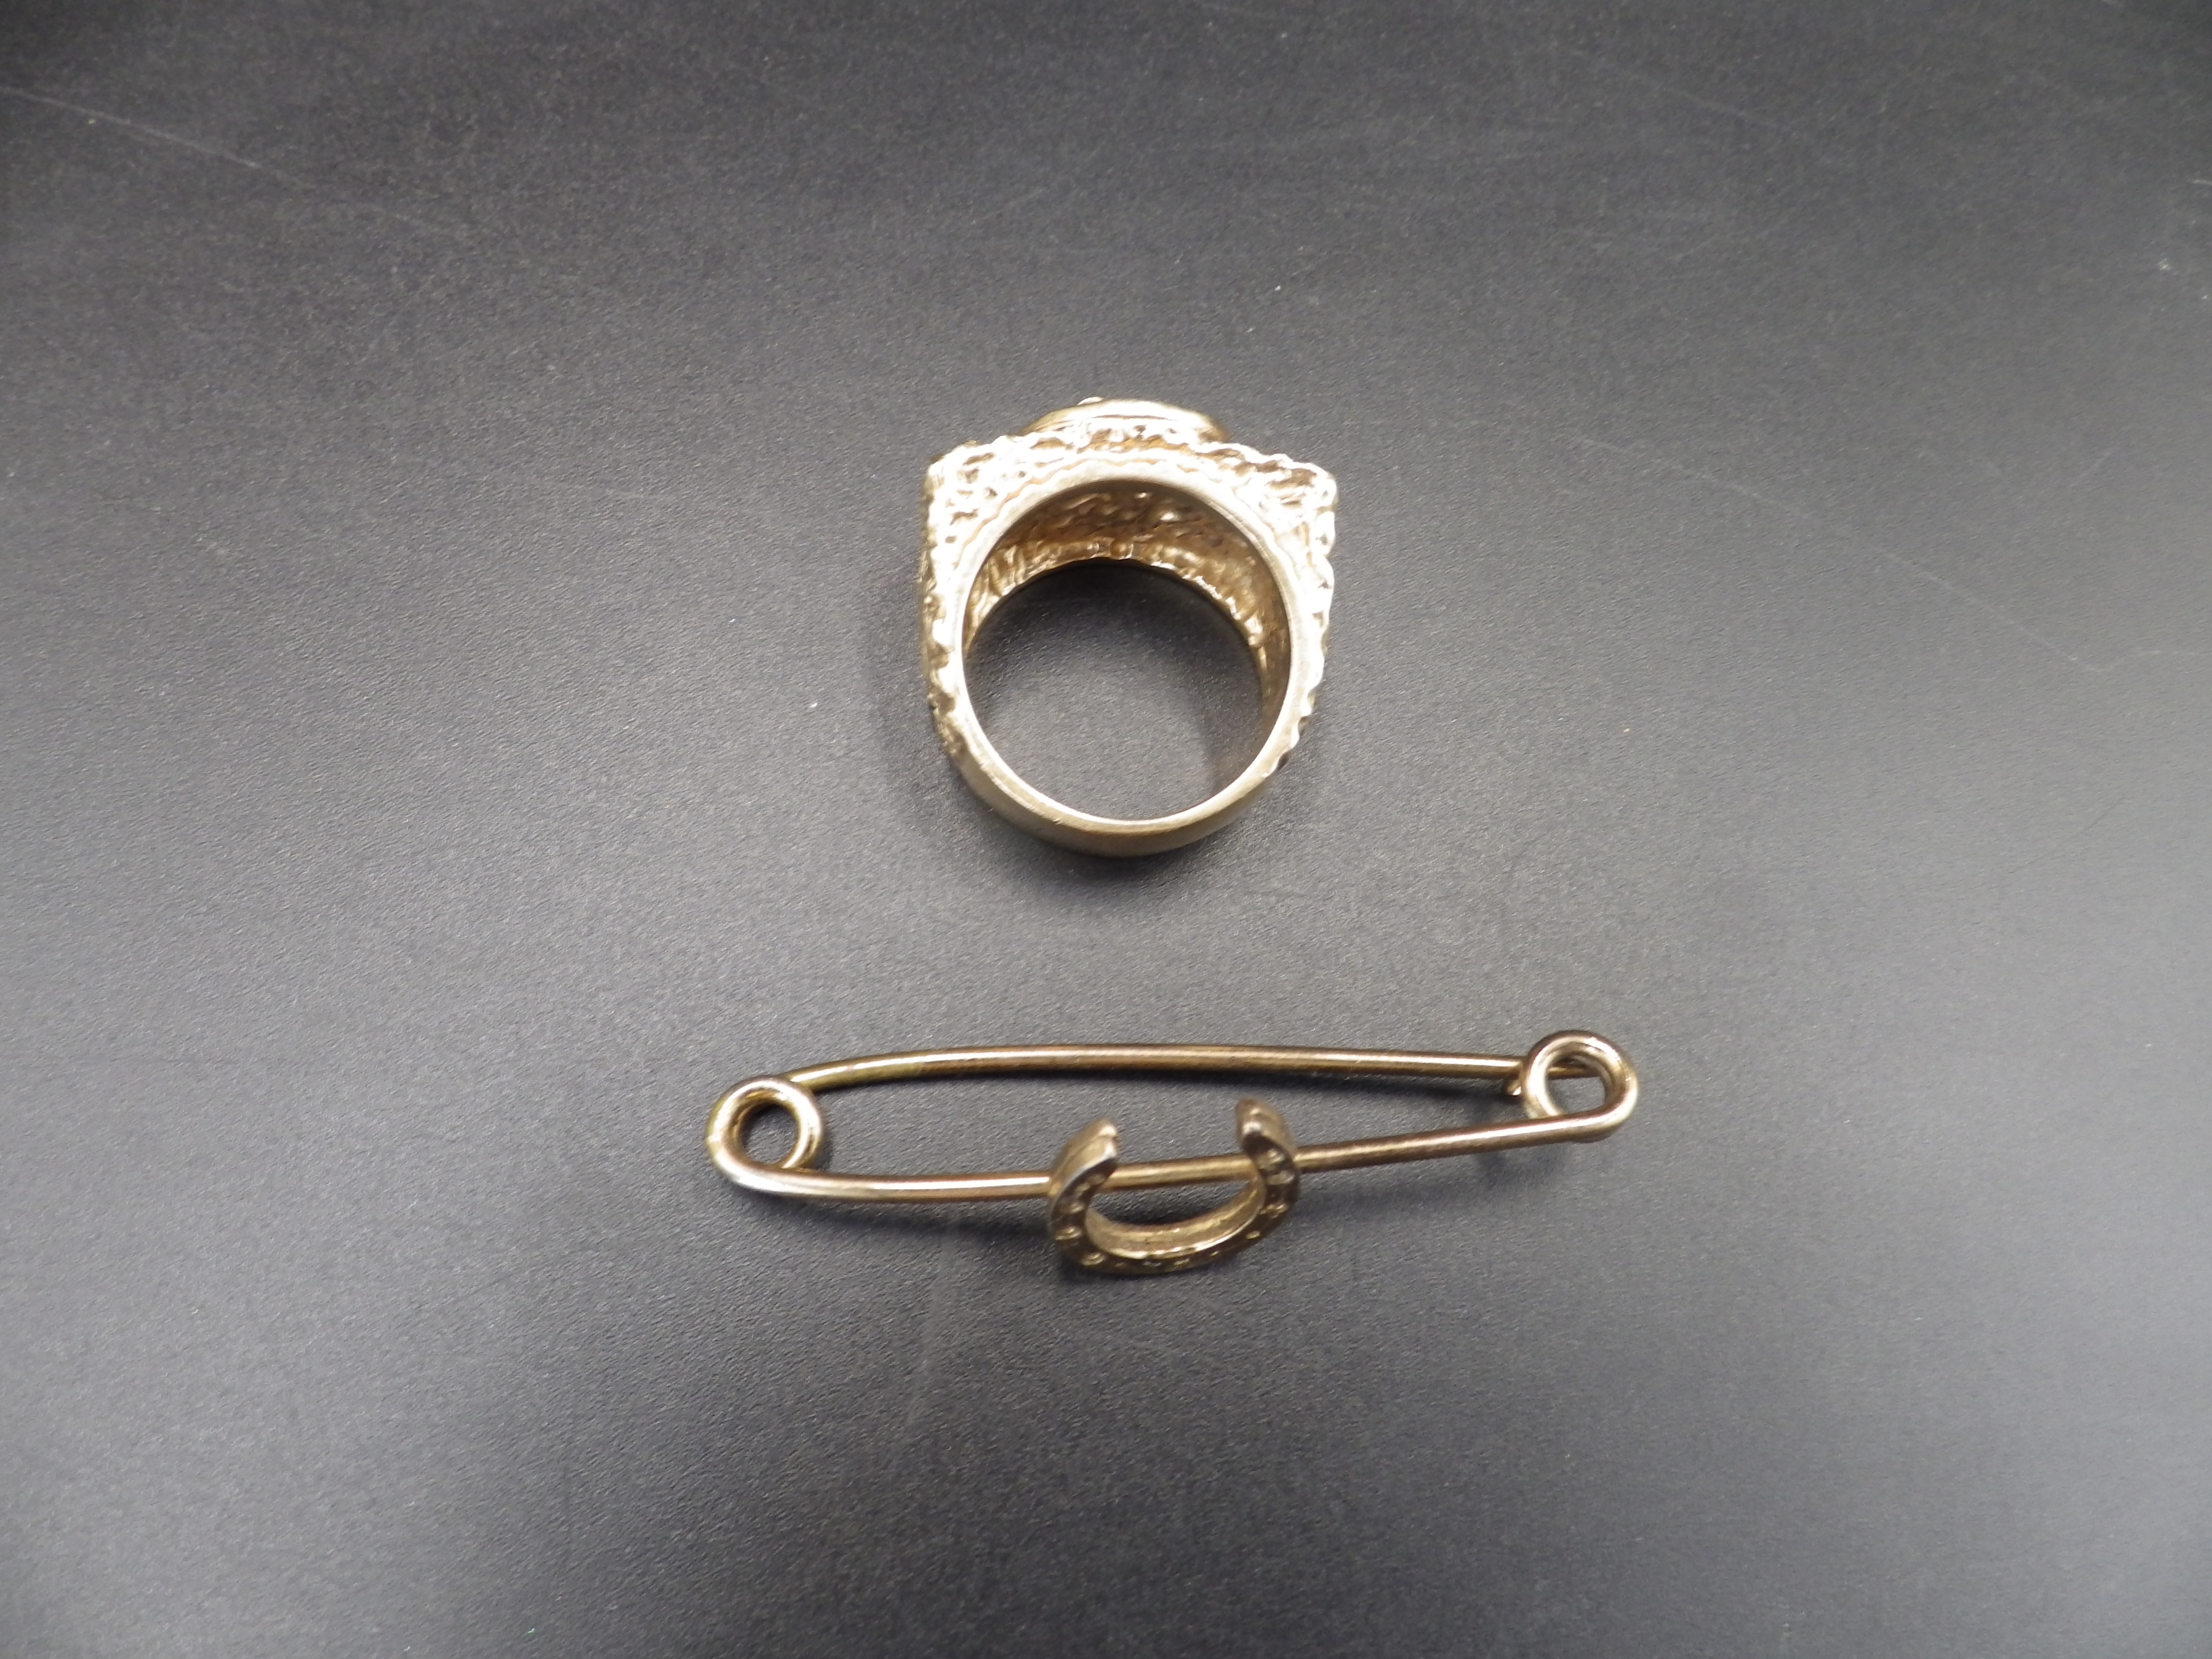 9ct gold ring with the image of a Horse head surrounded by a horseshoe, hallmarked London size X, - Image 4 of 4